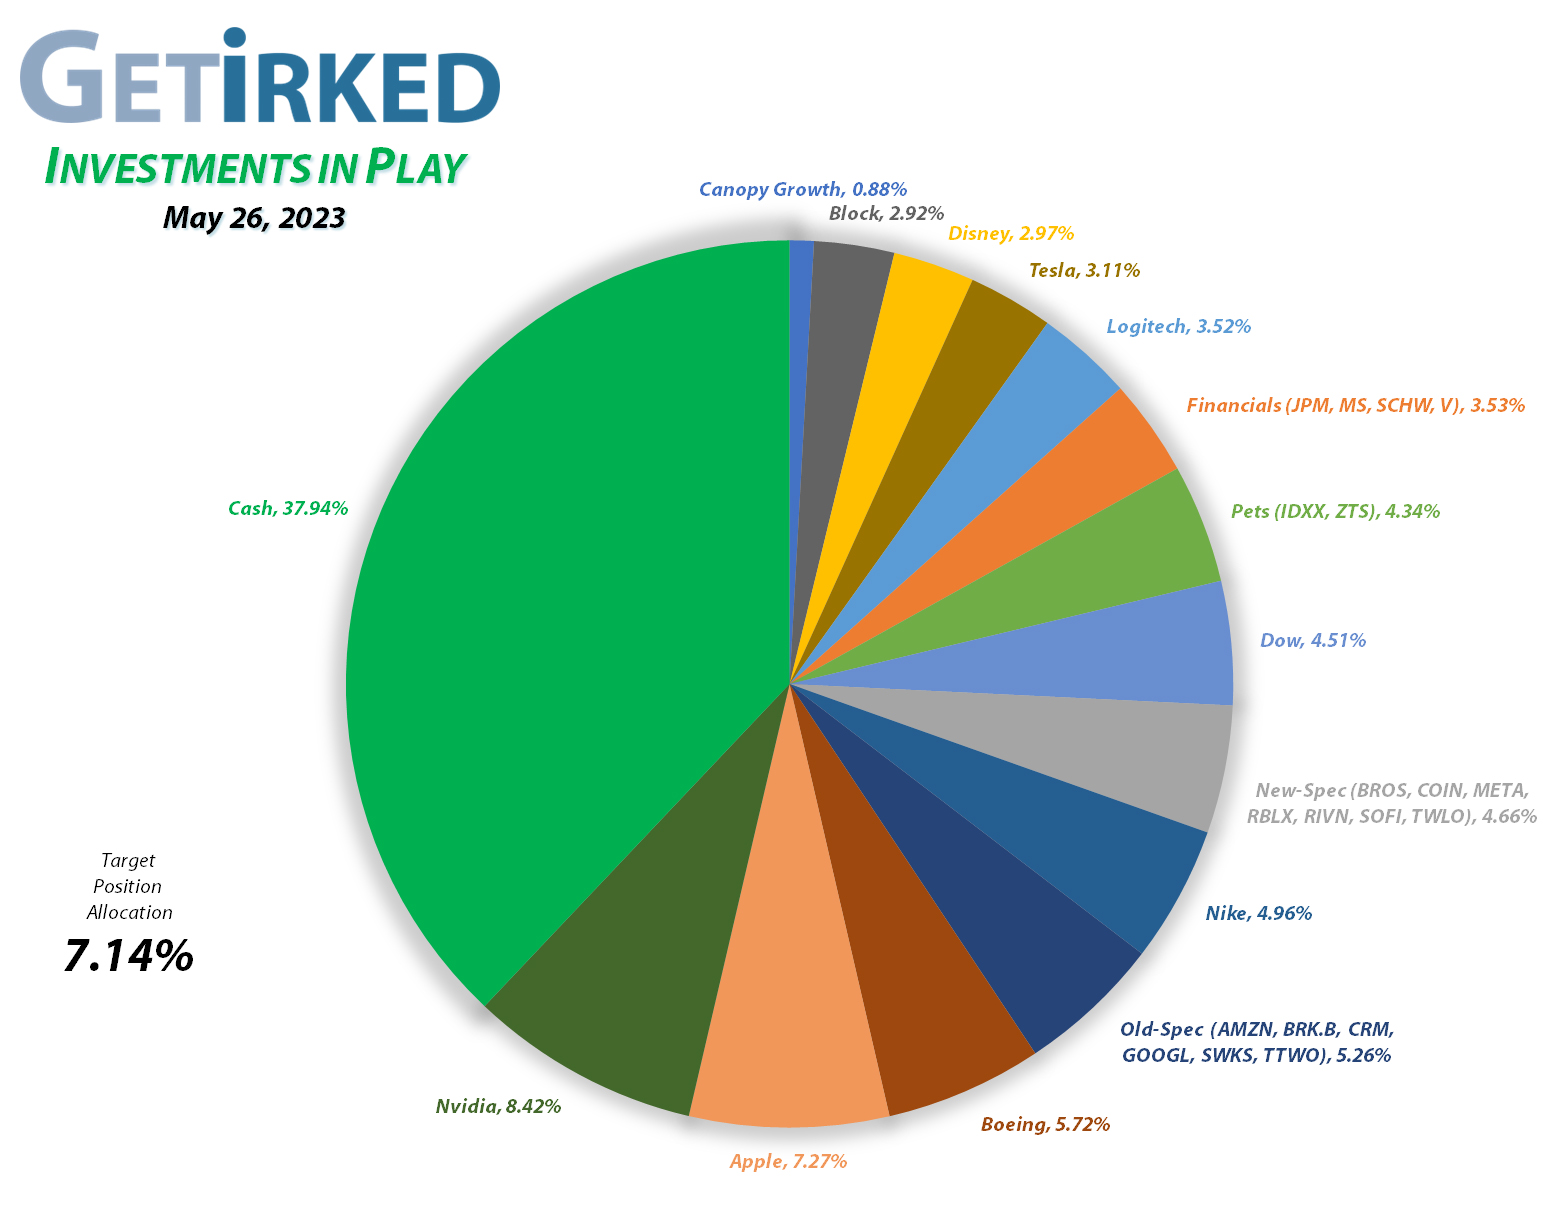 Get Irked - Investments in Play - Current Holdings - May 26, 2023